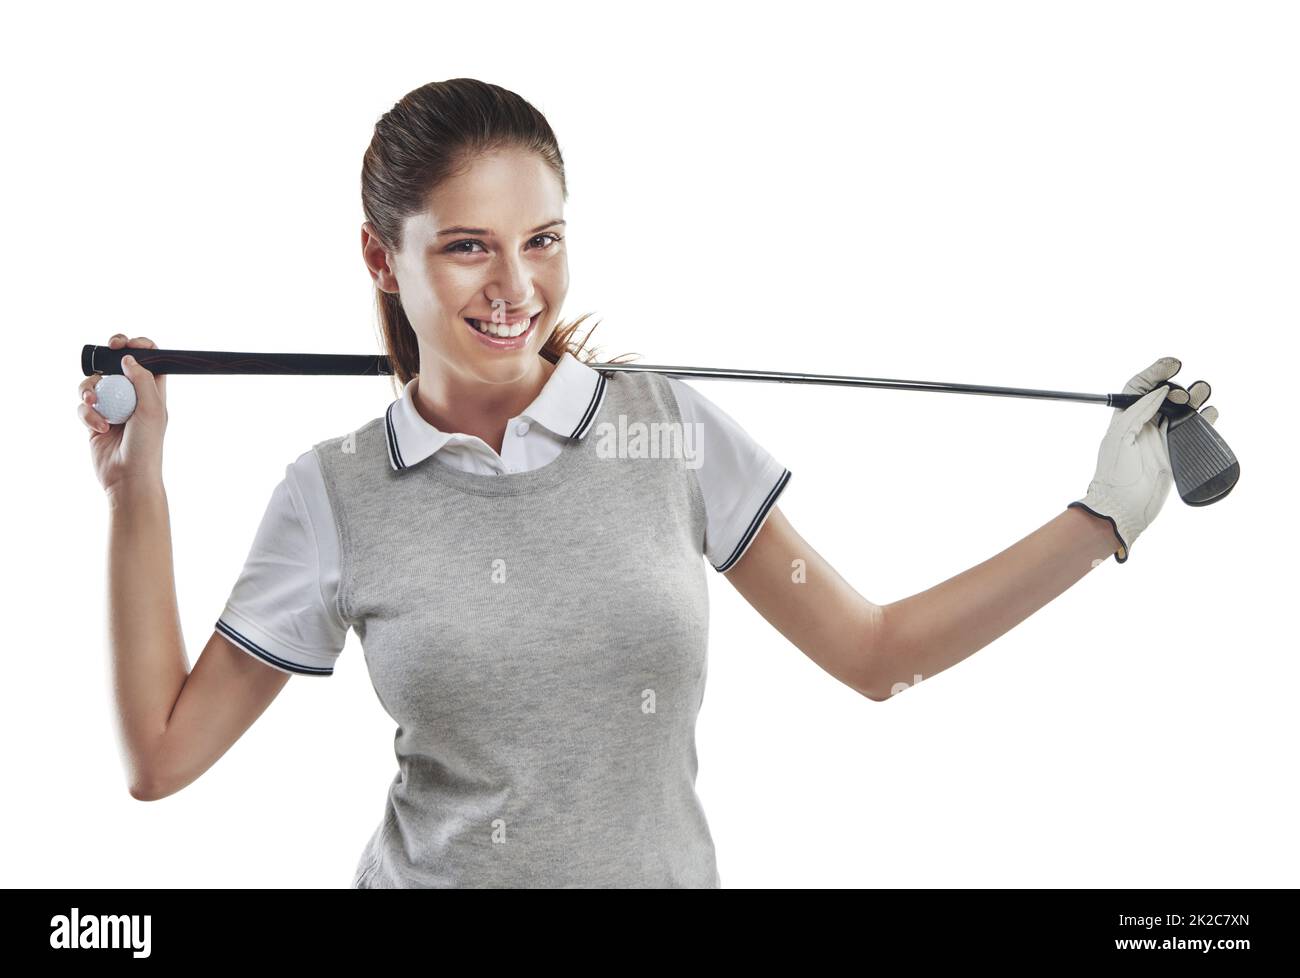 Golf gives good vibes. Studio shot of a young golfer holding a golf club behind her back isolated on white. Stock Photo